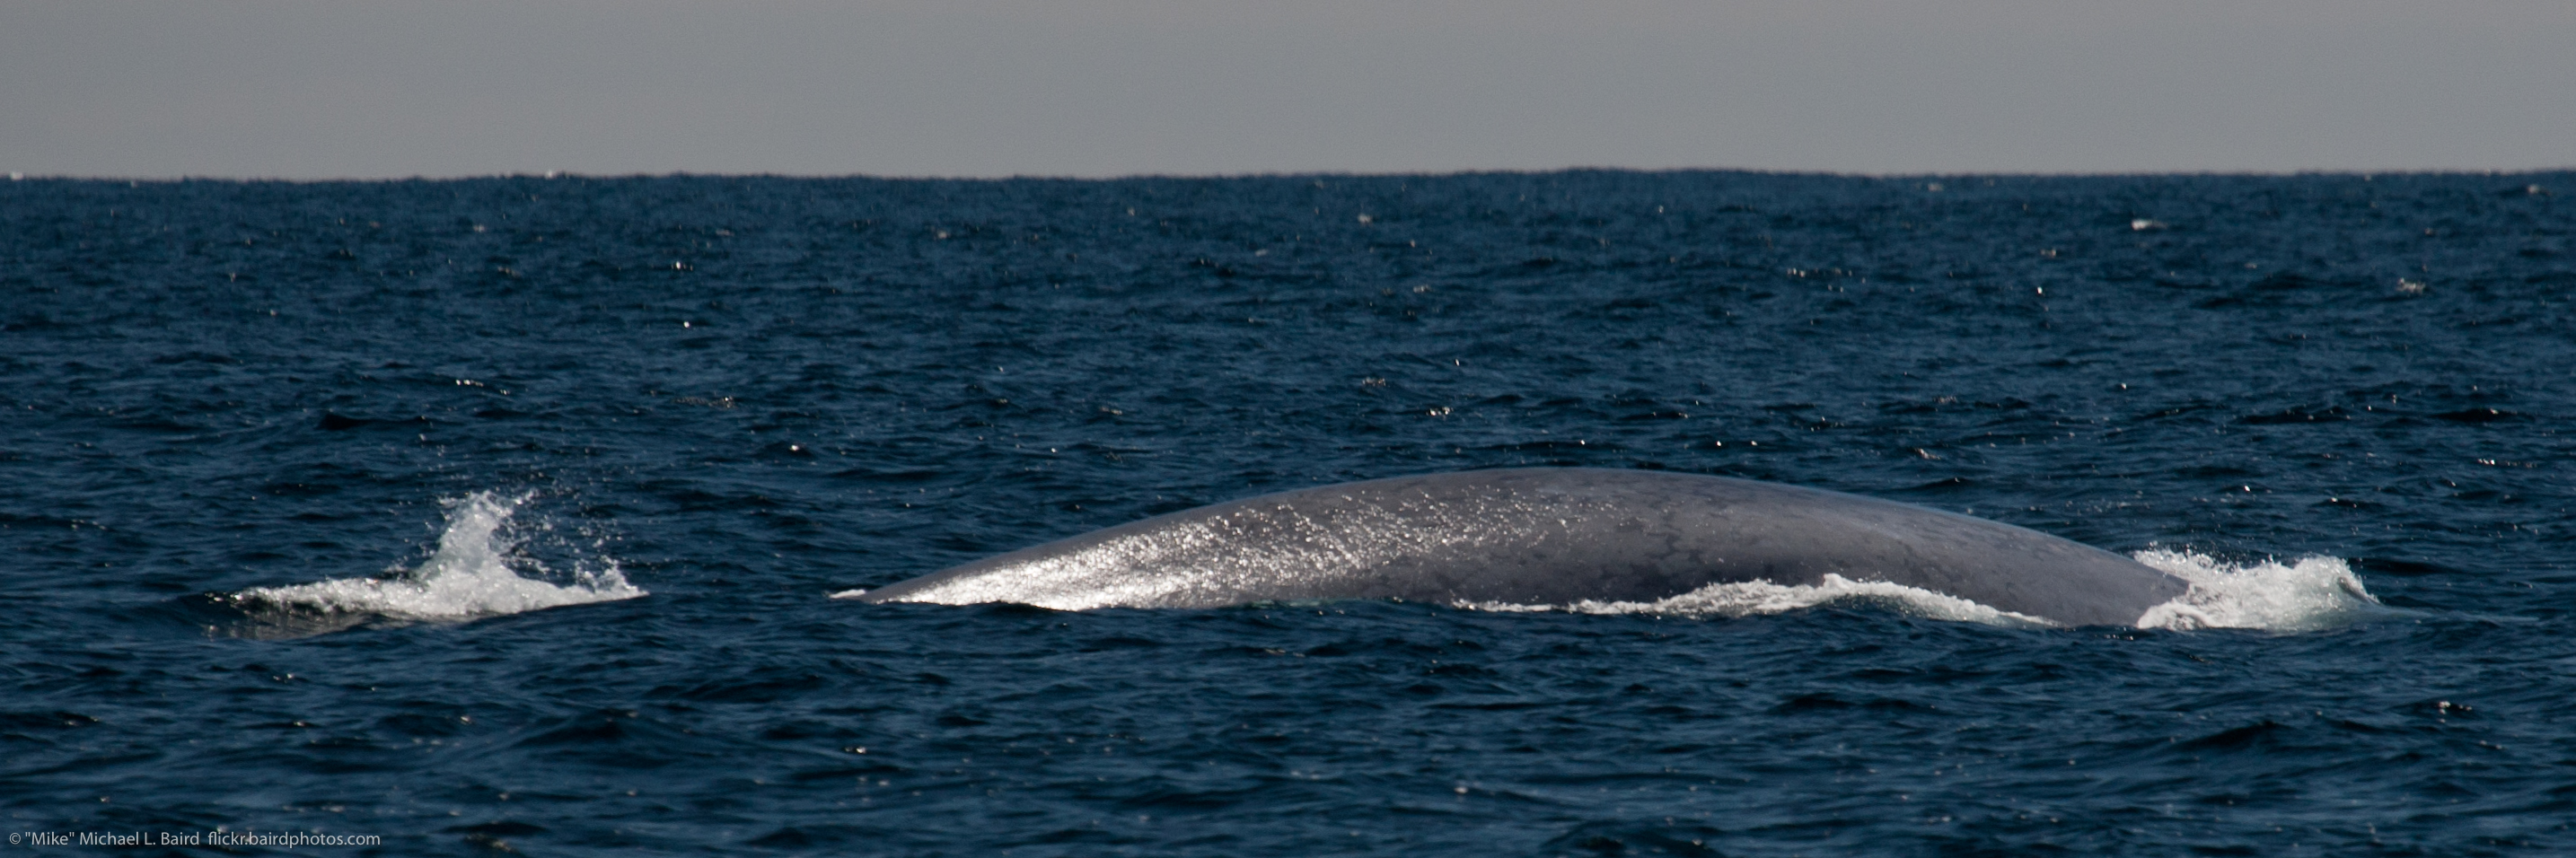 The back portion of a blue whale protrudes out of the ocean.